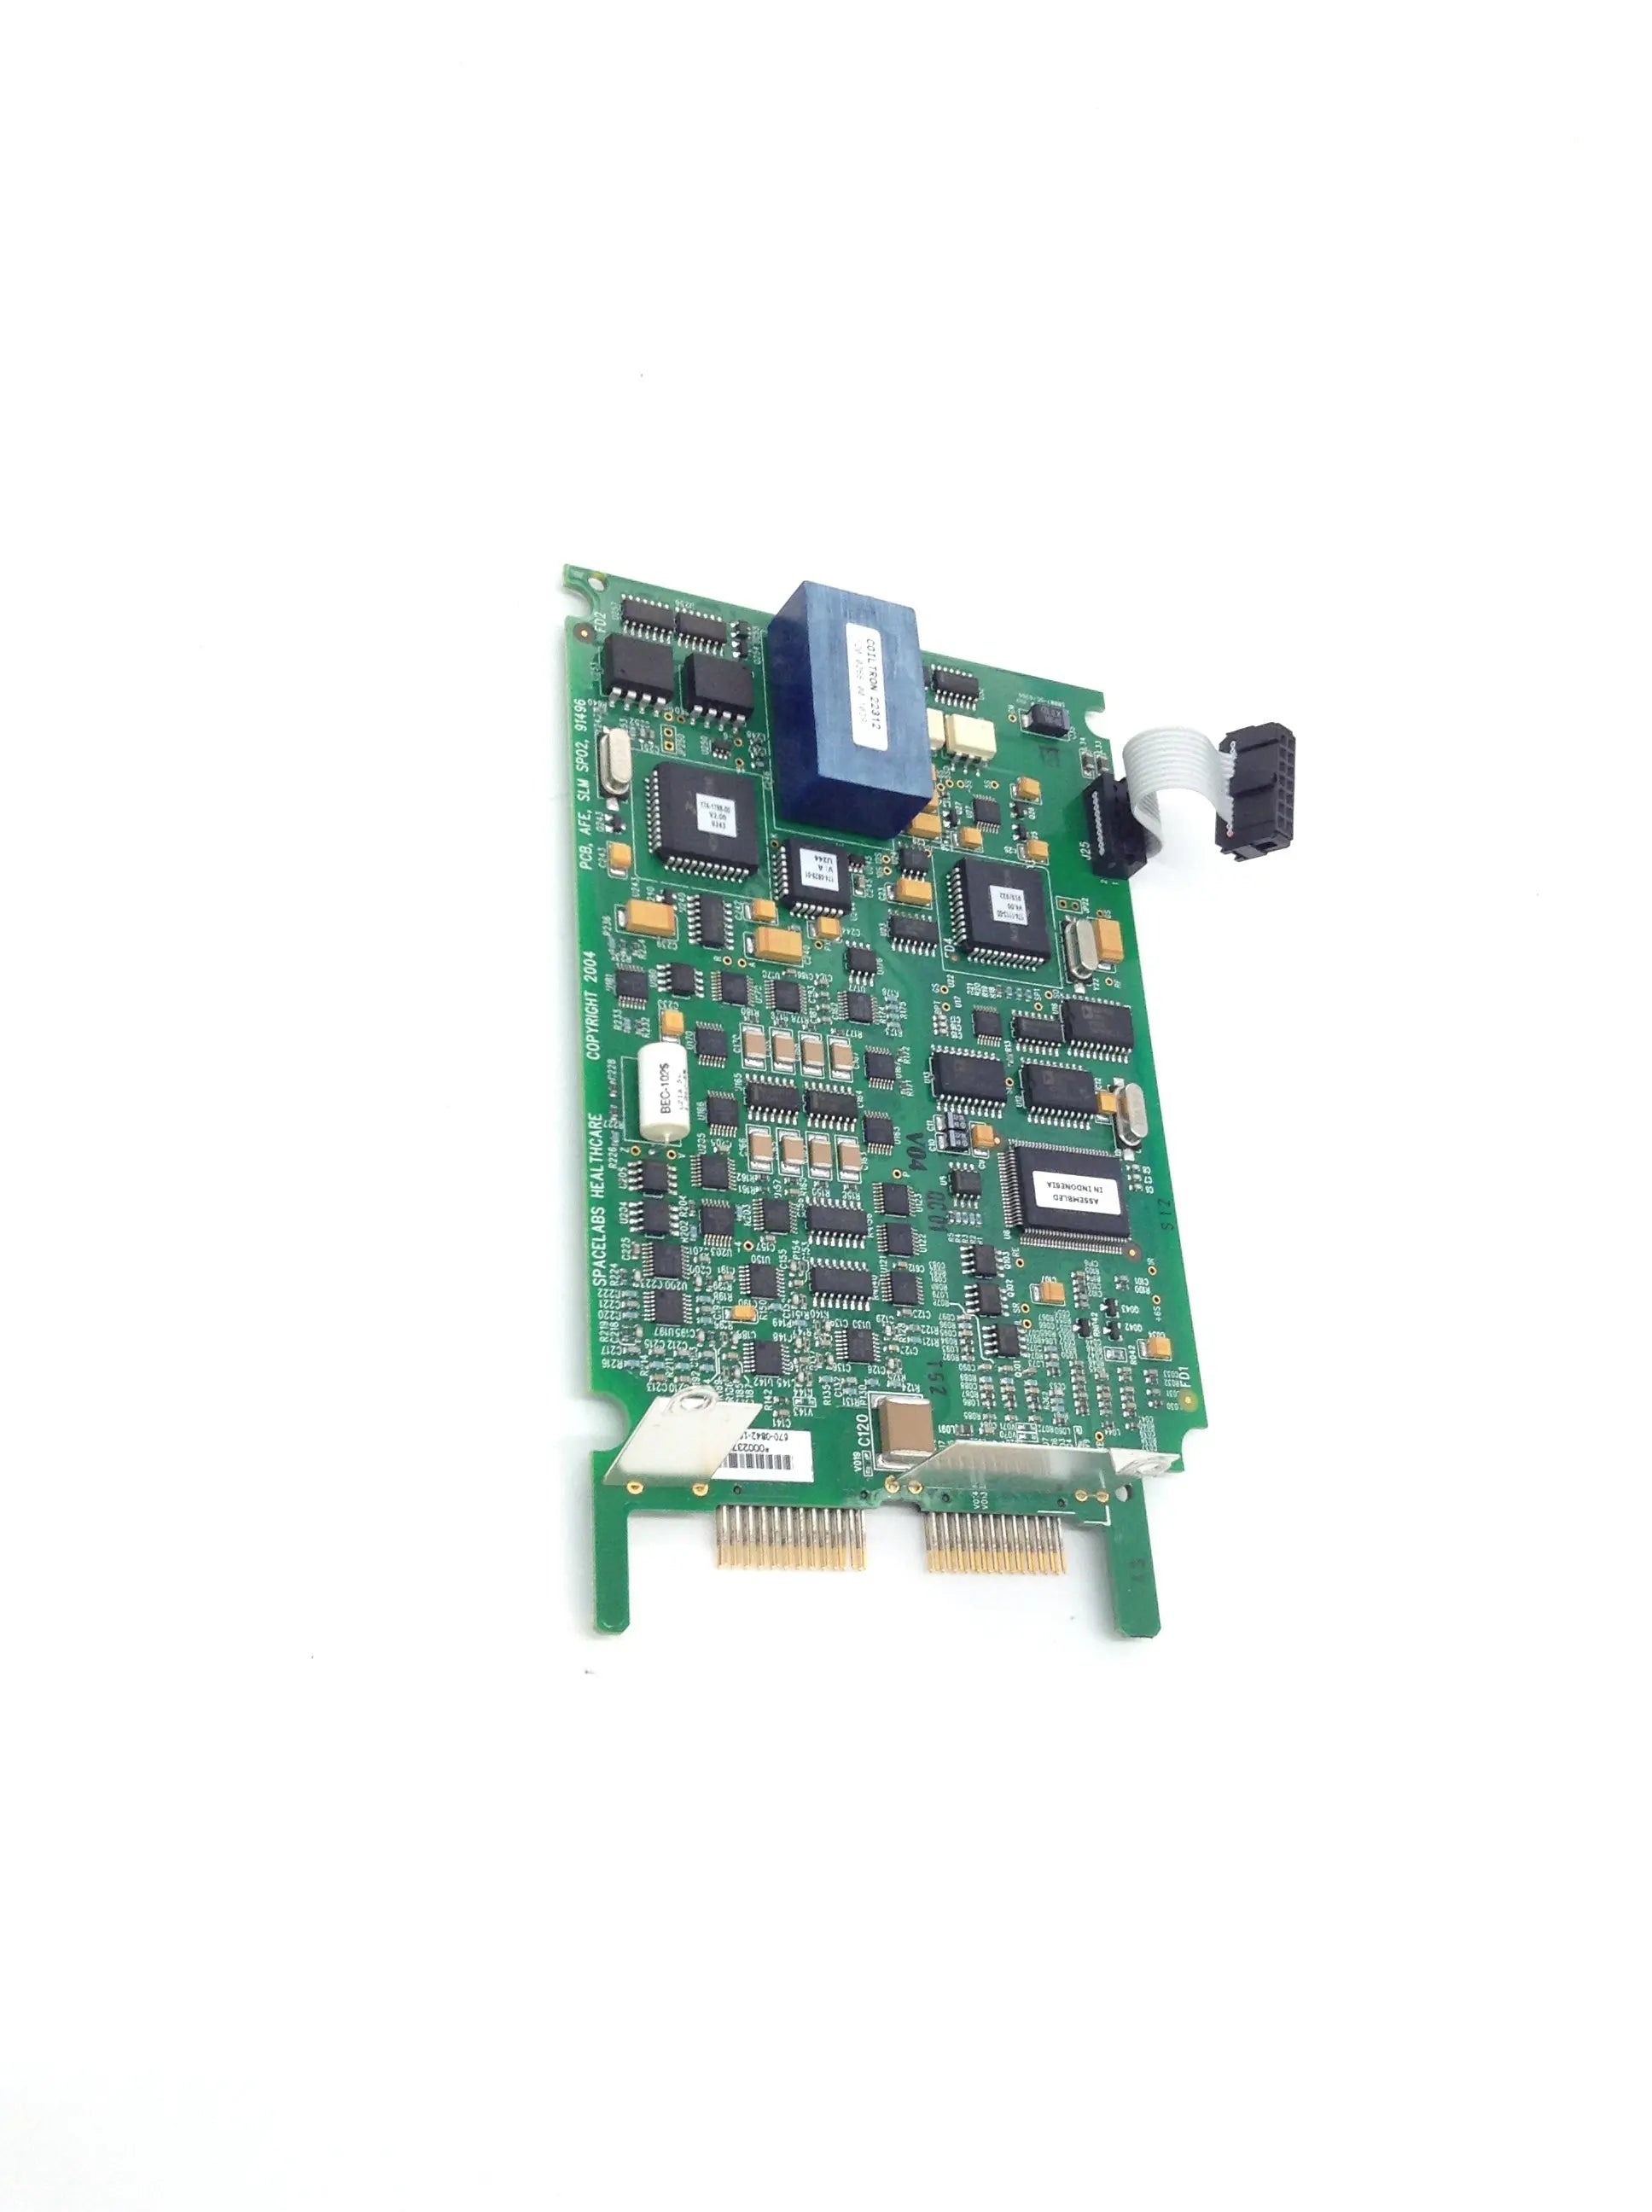 Load image into Gallery viewer, A Biomedical Service Spacelabs MPC860 CPU/NIBP ASSEMBLY BOARD 0320-0324 670-0842-01 670-0882-01 